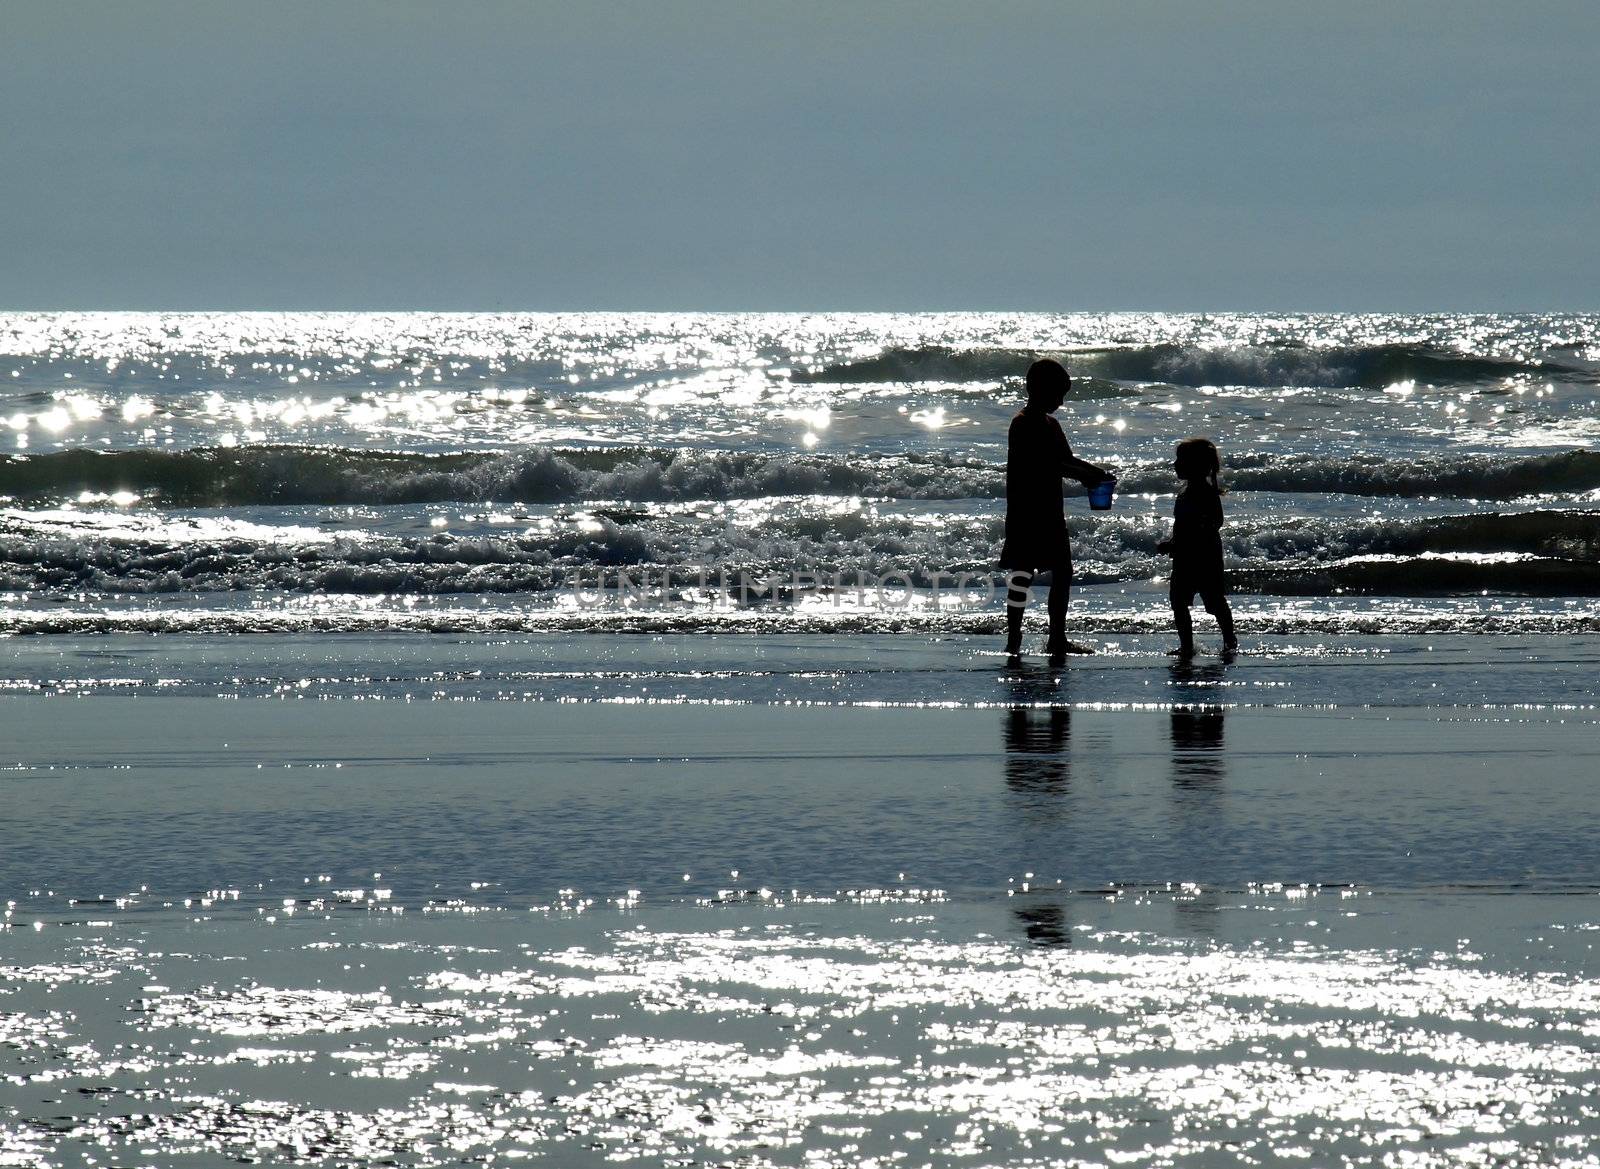 Two Kids Playing on the Beach as the Sun is Glistening on the Water